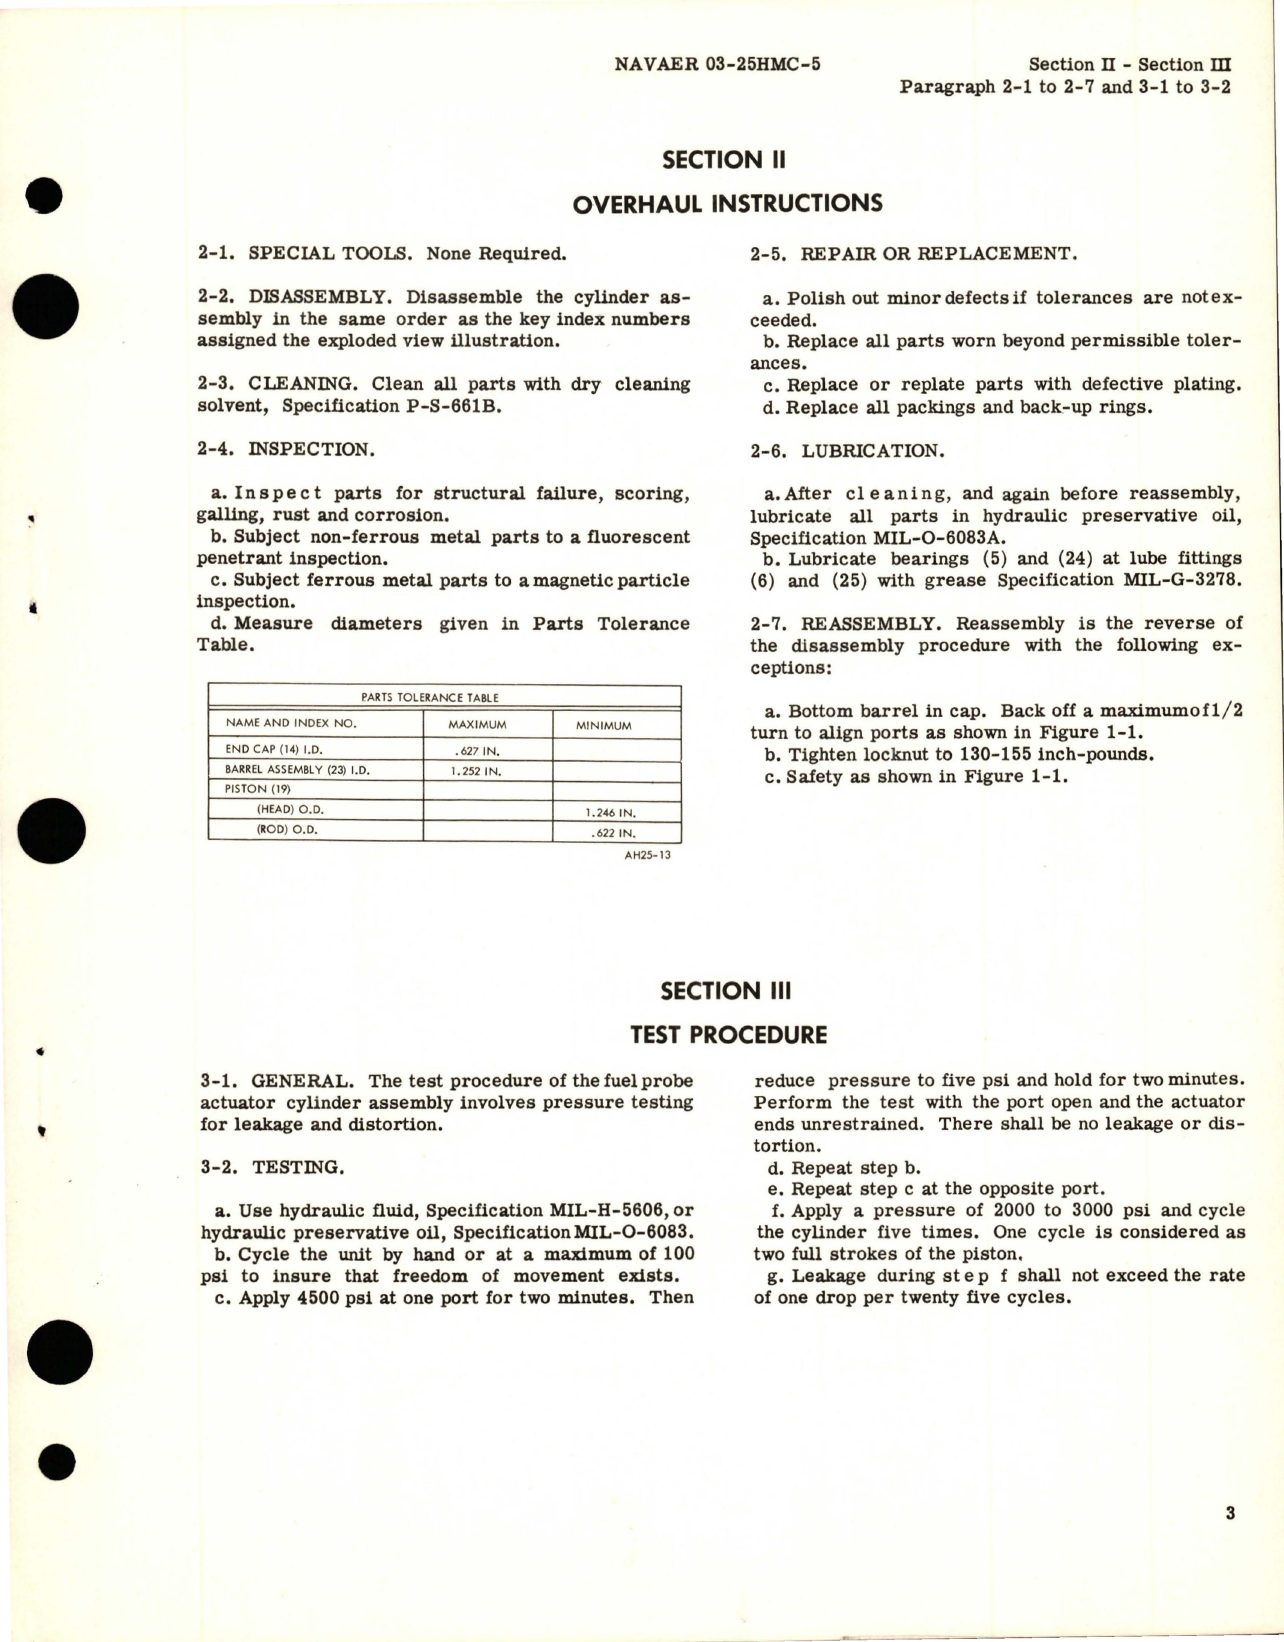 Sample page 5 from AirCorps Library document: Overhaul Instructions for Fuel Probe Actuator Cylinder Assembly - Part 25-69105-301